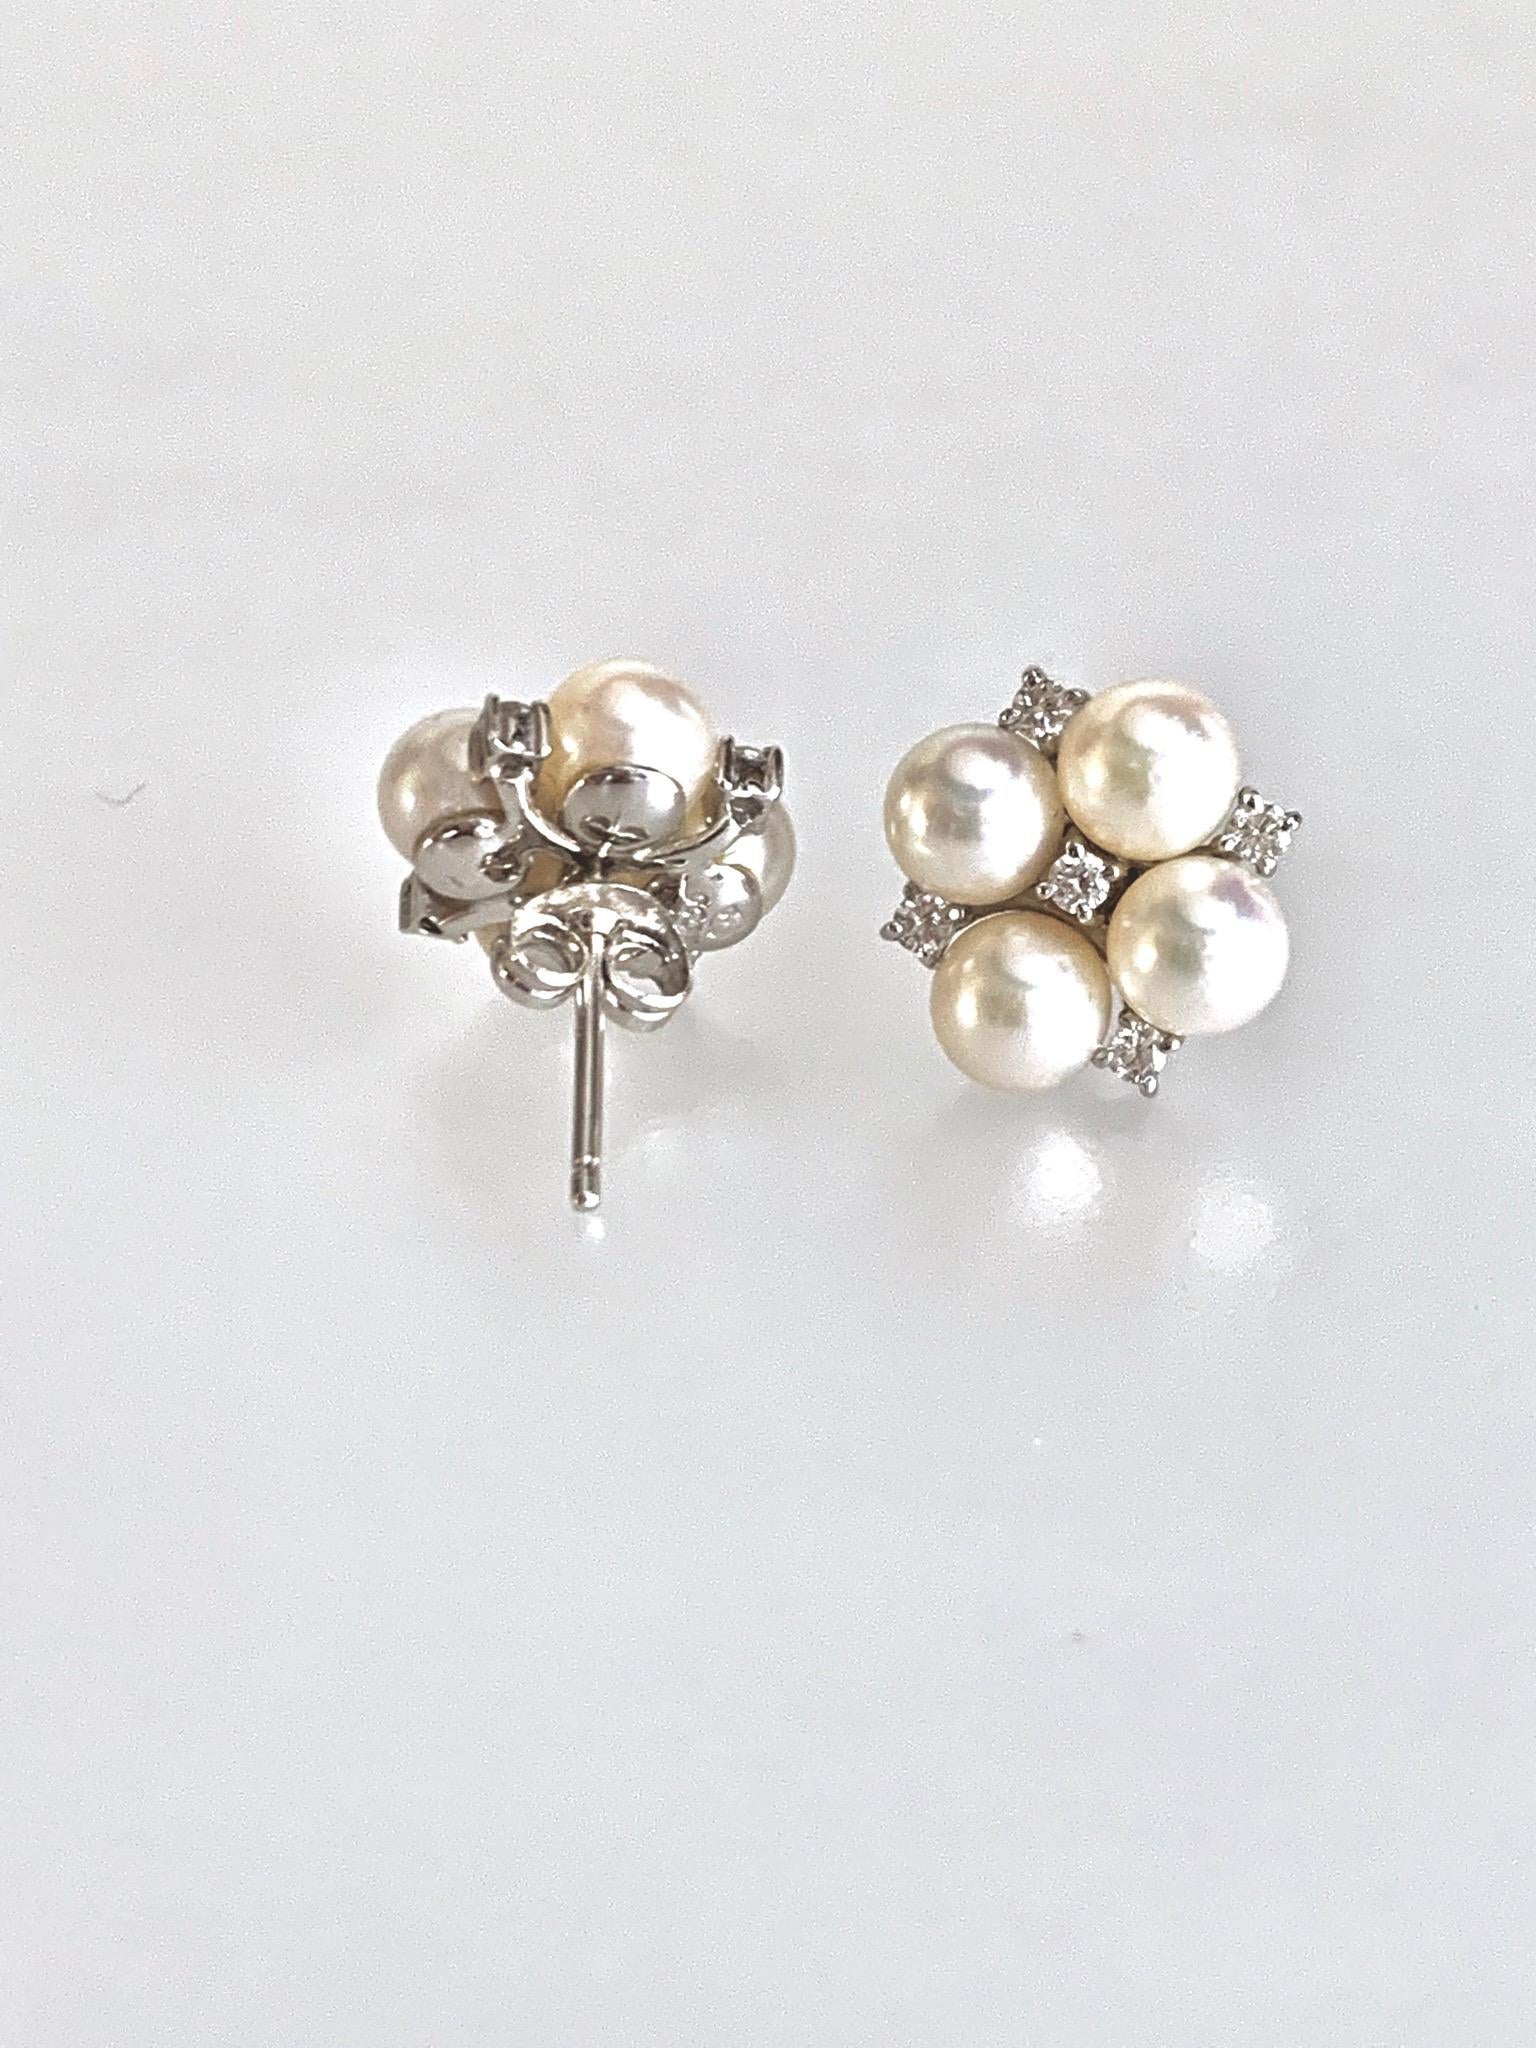 Gemolithos Cultured Pearls and Diamond Earrings 18 Karat, for Every Day In Good Condition For Sale In Munich, DE